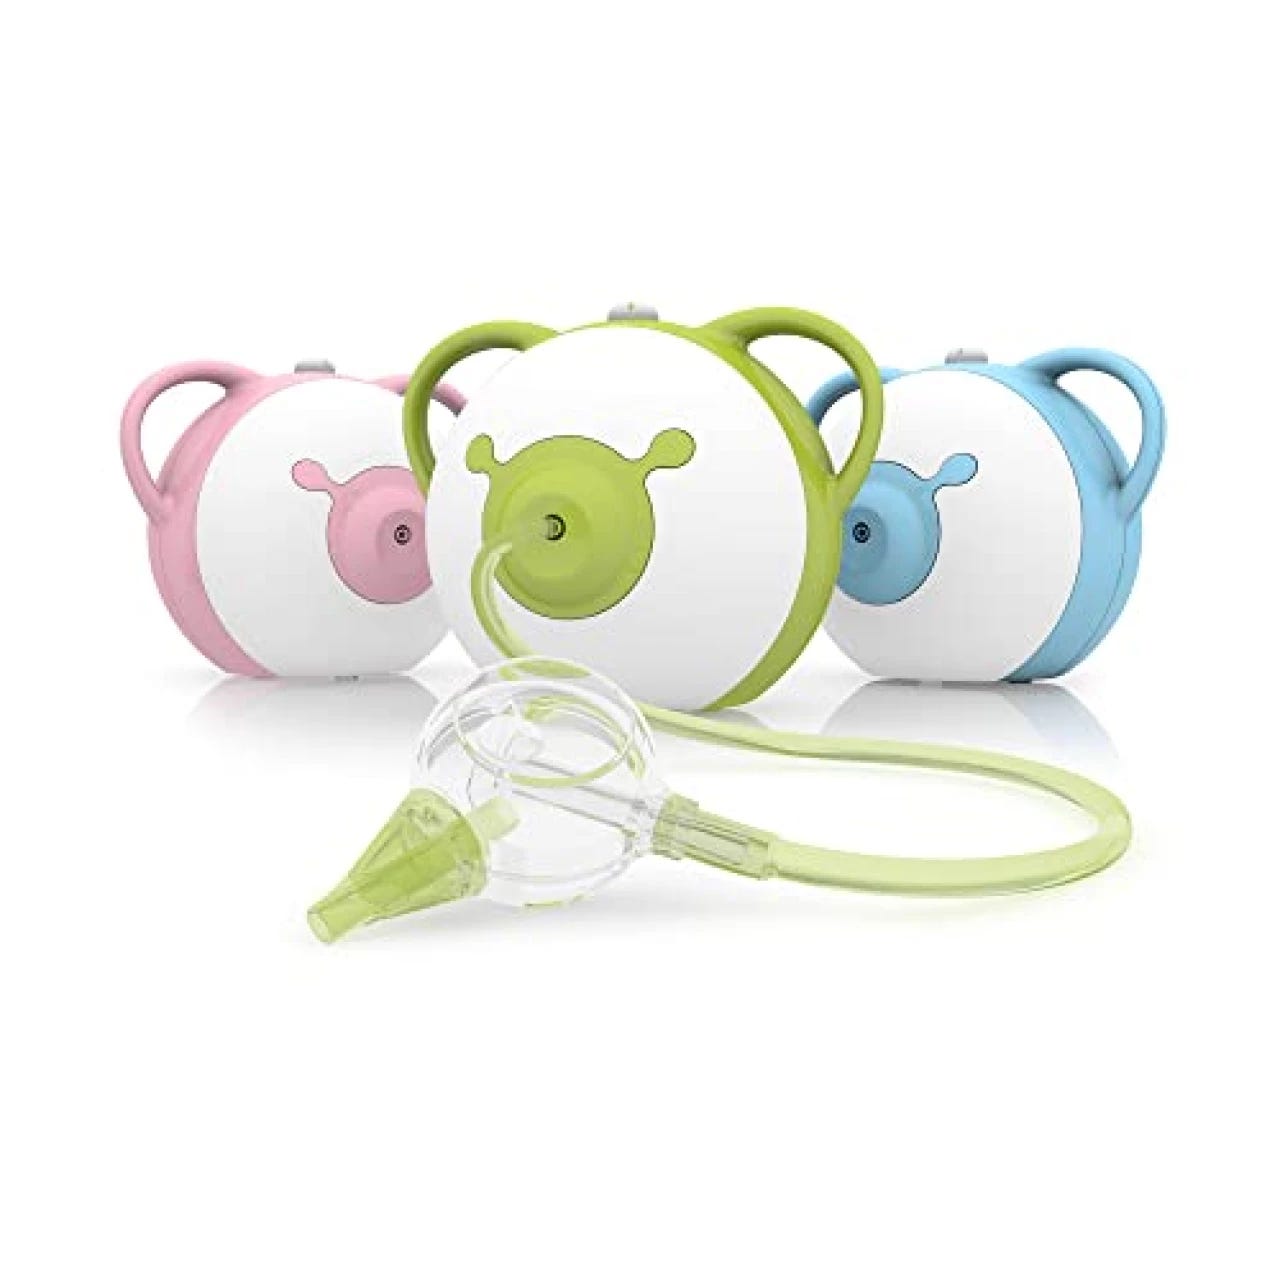  Customer reviews: Electric Baby Nasal Aspirator, The NozeBot  by Dr. Noze Best, Hospital Grade Suction, Nasal Vacuum